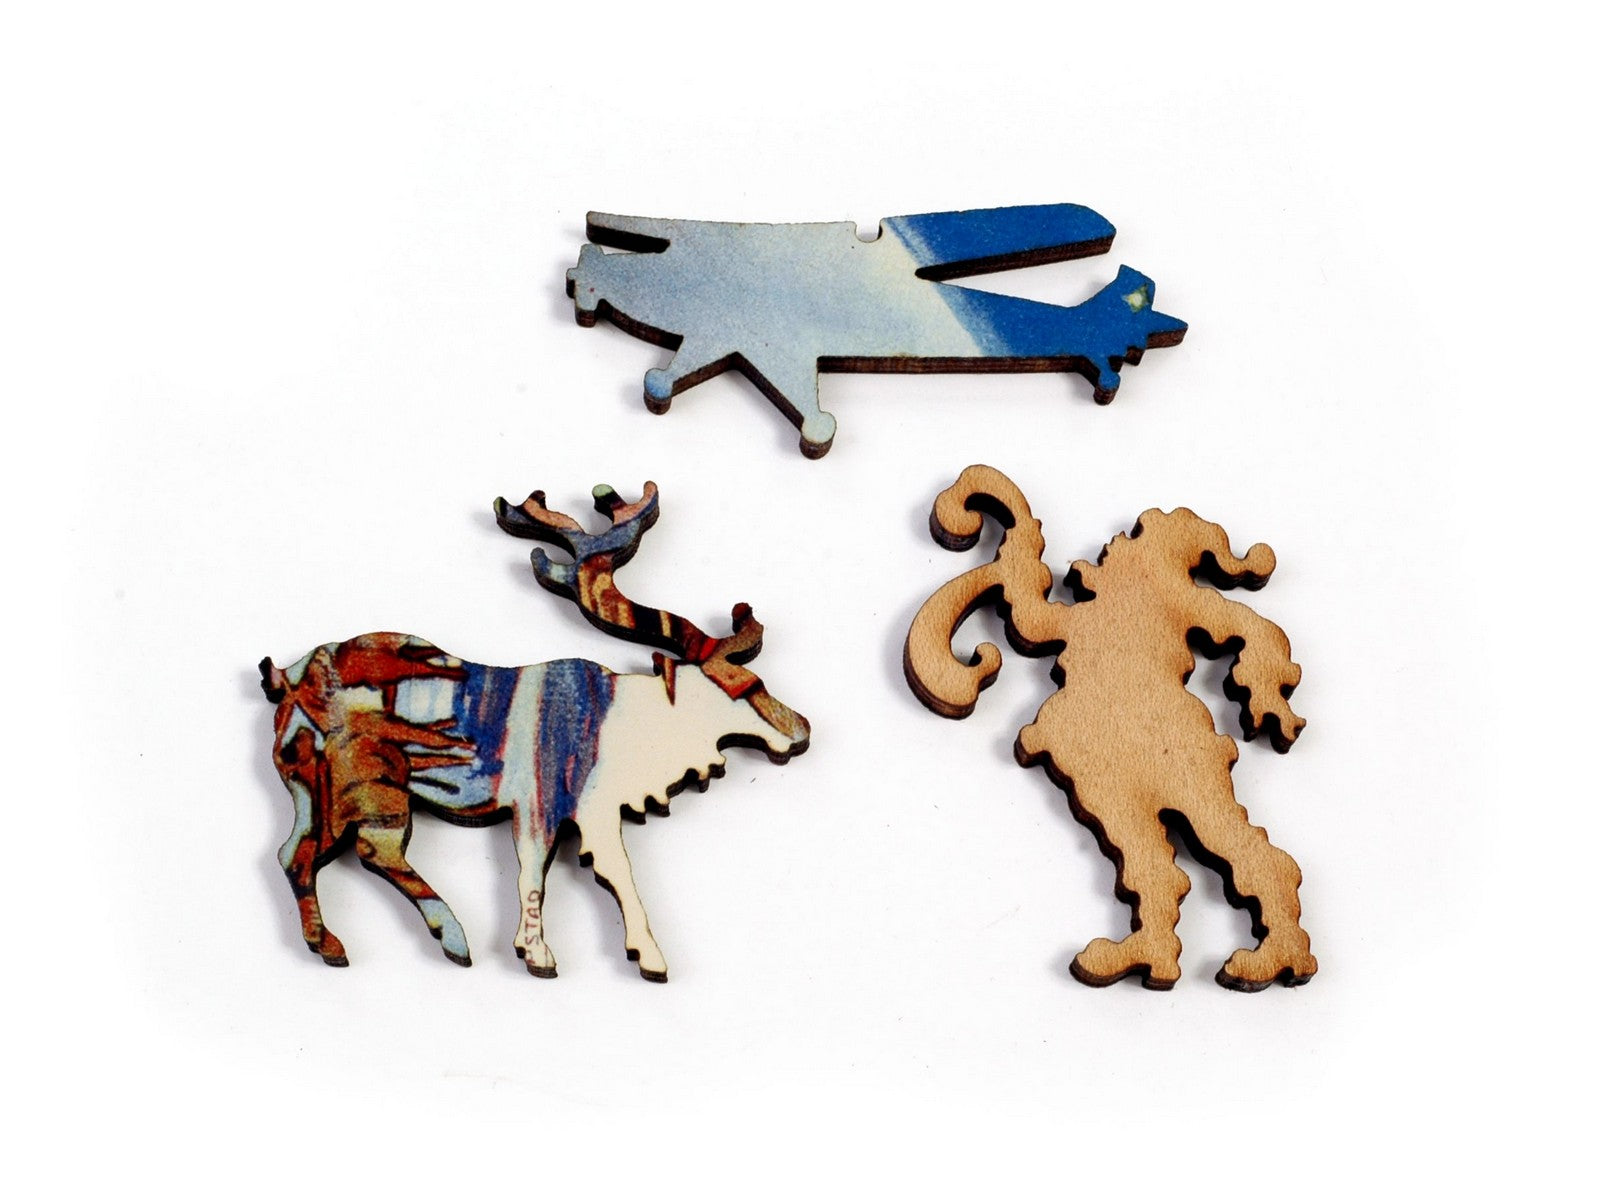 A closeup of some pieces in the shape of santa, a reindeer, and an airplane.